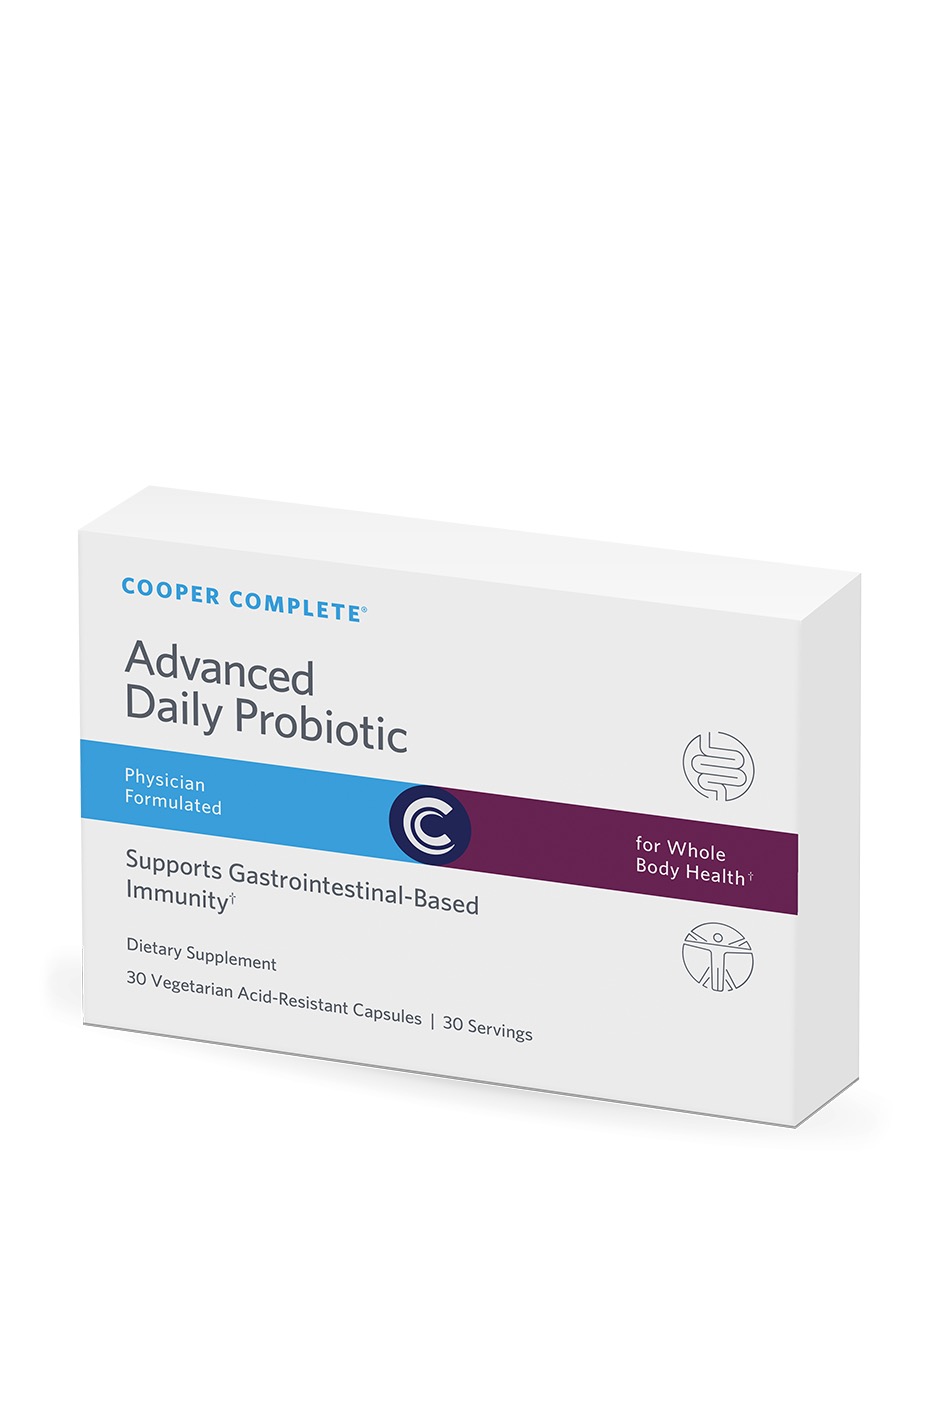 Box of Cooper Complete Advanced Daily Probiotic